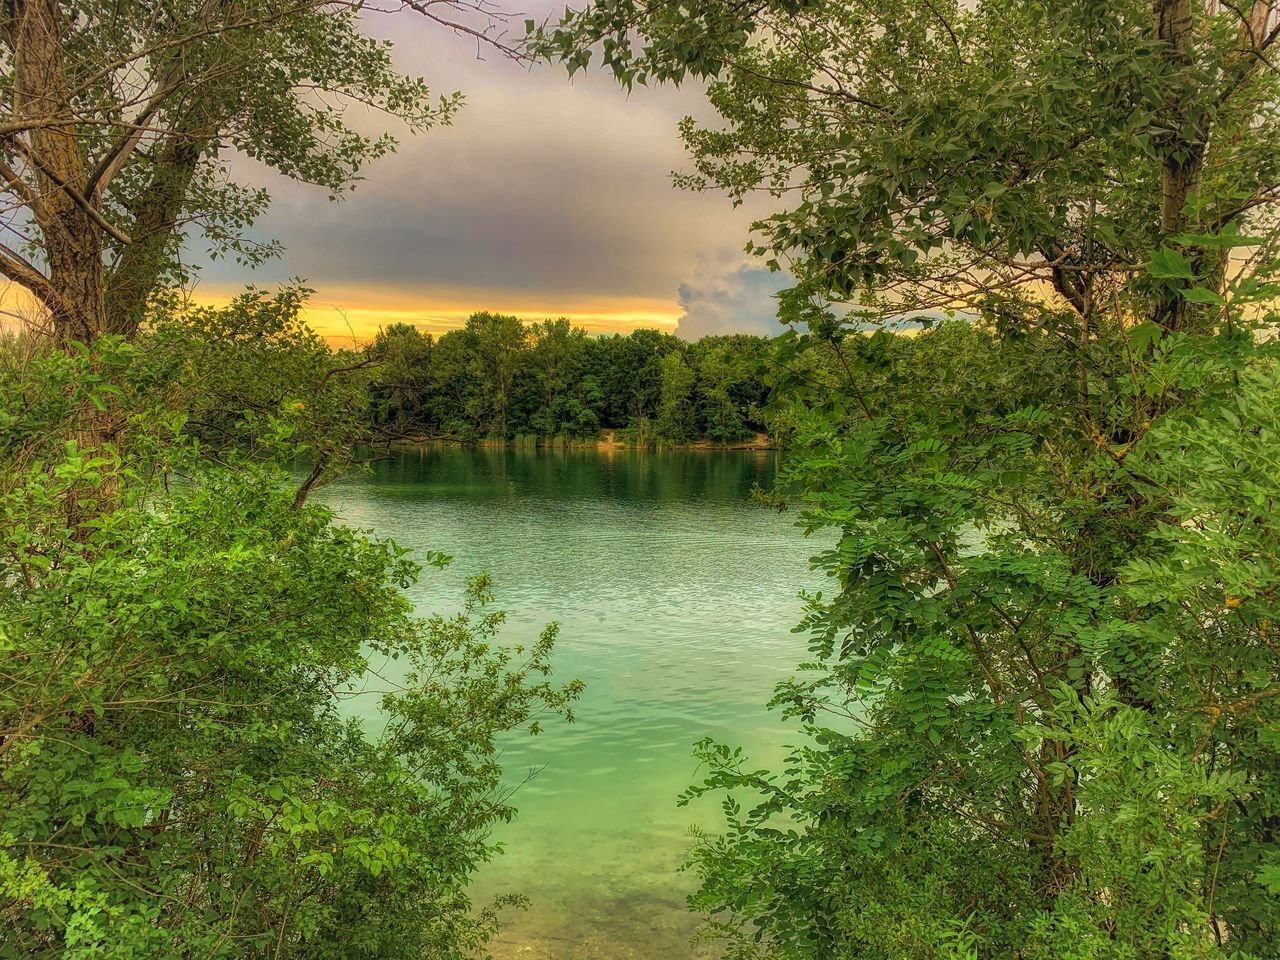 SCENIC VIEW OF LAKE AGAINST SKY IN FOREST